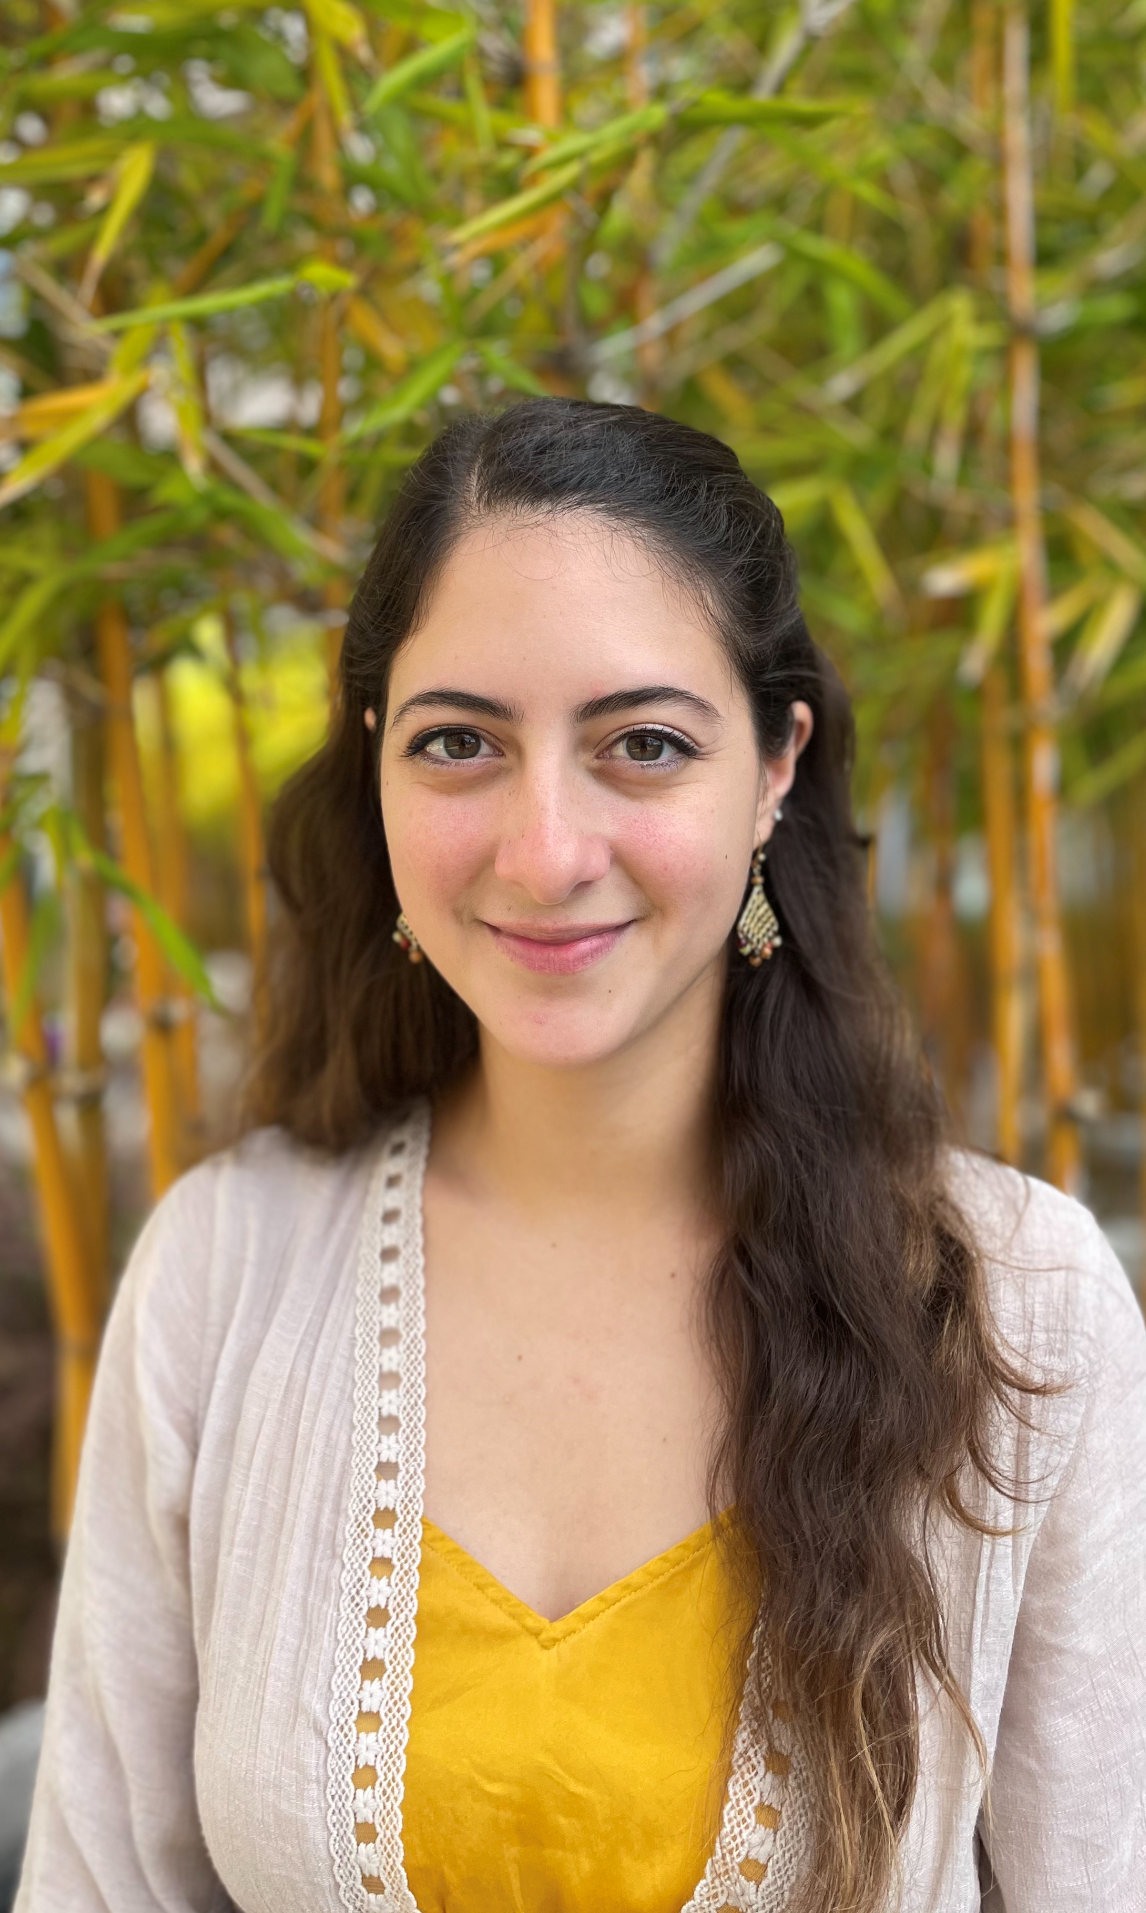 Marian Avila Breach's headshot. Marian is slightly smiling standing in front of bamboo trees with green leaves. Marian is wearing a yellow blouse with a white overshirt, with long wavy brown hair.